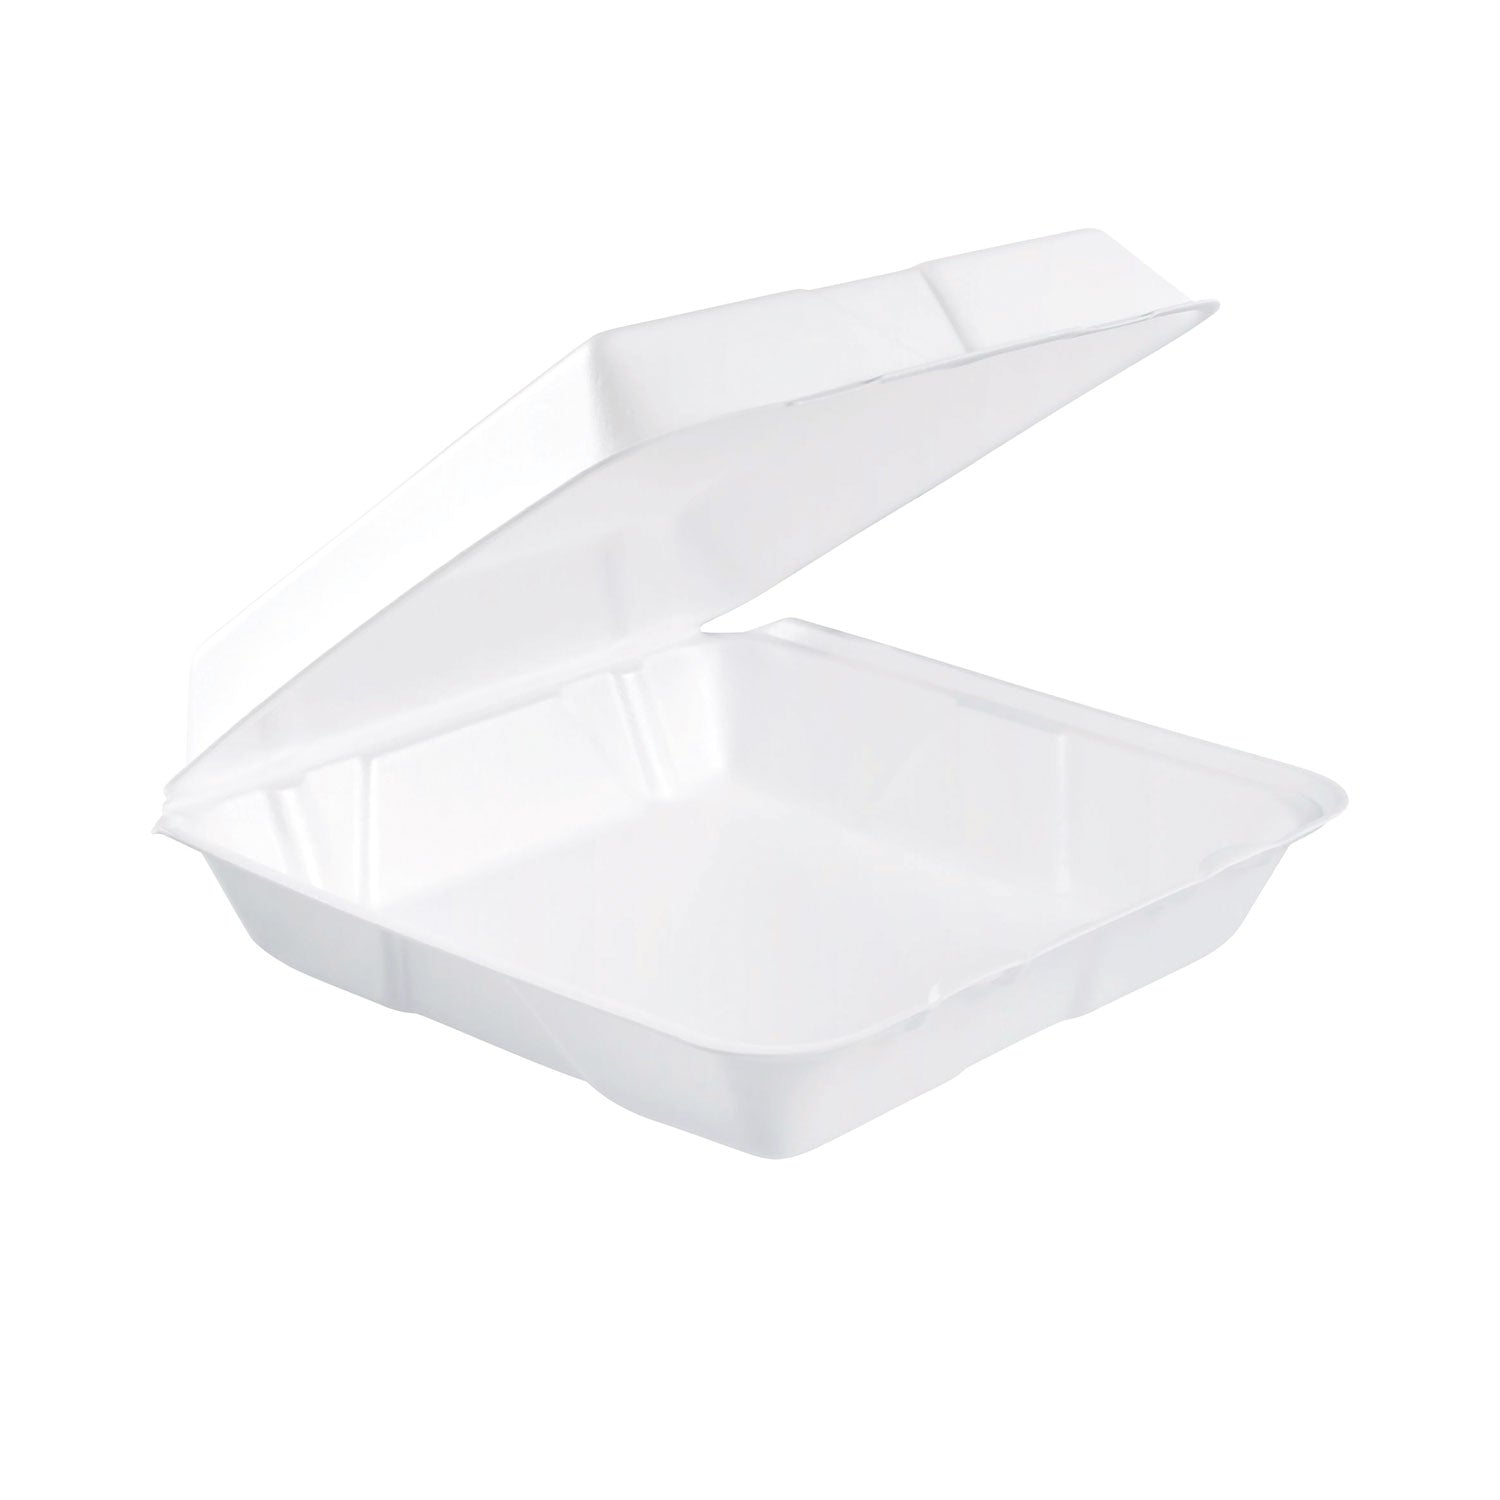 Foam Hinged Lid Containers, 9.25 x 9.5 x 3, 200/Carton - 